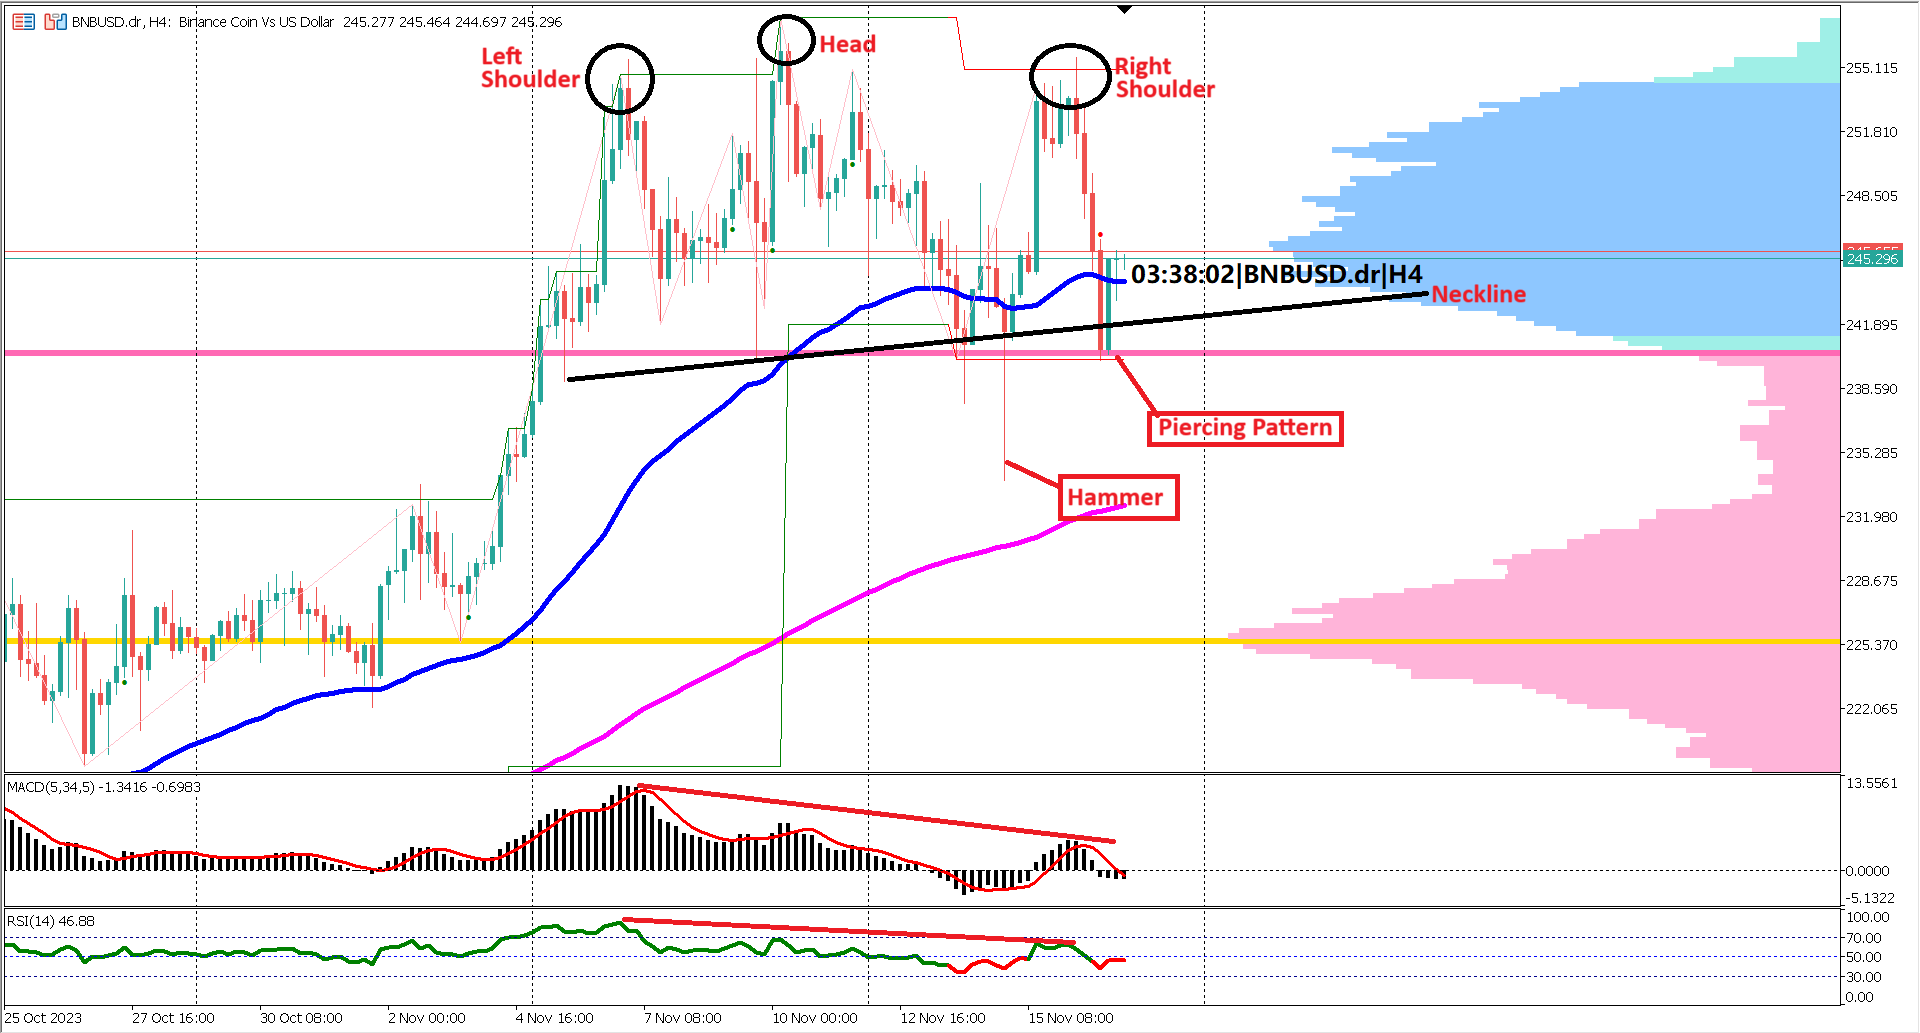 BNB and XLM Technical Insight: Head and Shoulder Patterns and Oscillator Dynamics